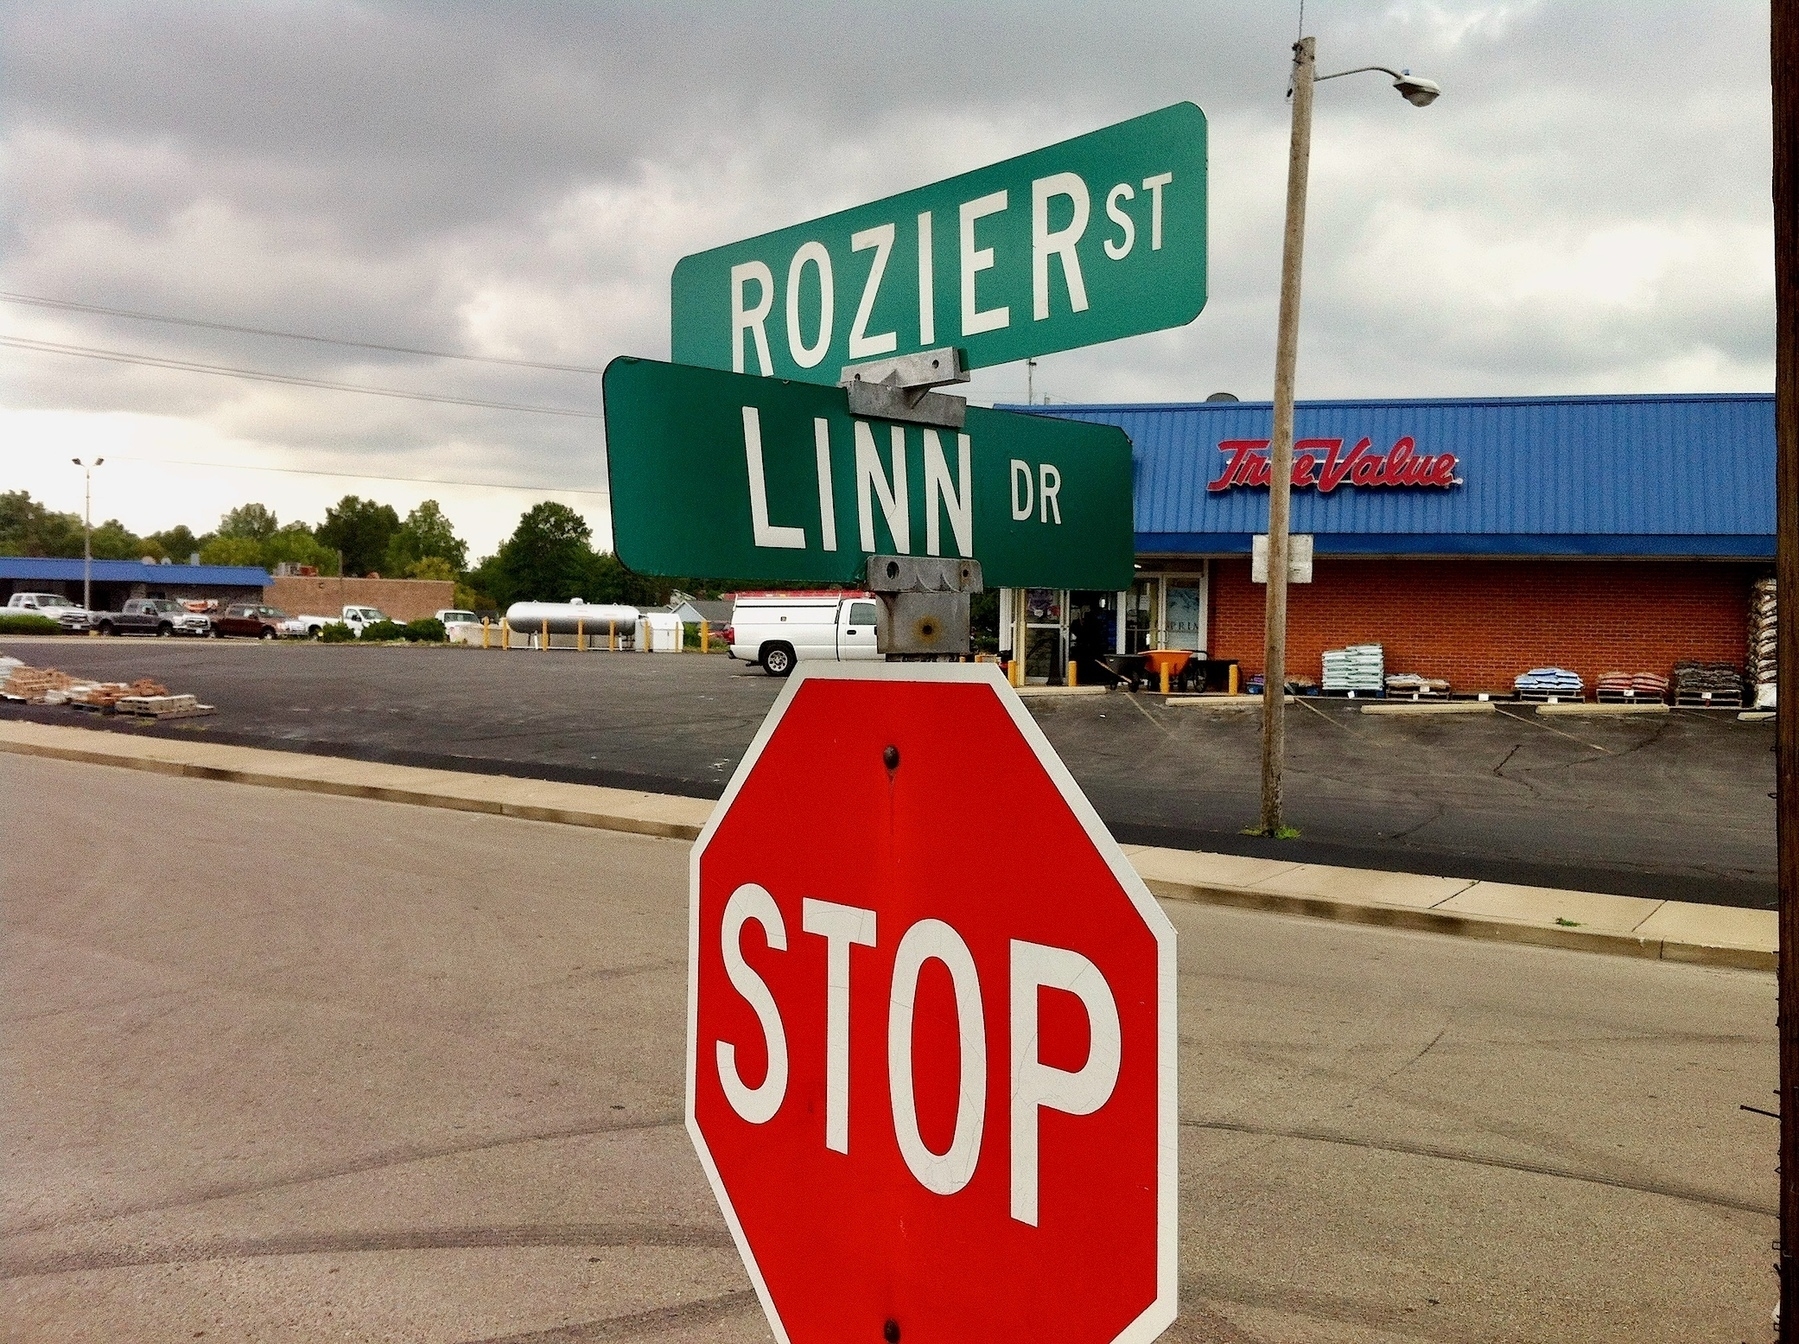 Red stop sign in the foreground, with road names mounted on top: 'Rozier St' and 'Linn Dr'; a True Value hardware store is in the background, the parking lot right behind the sign.